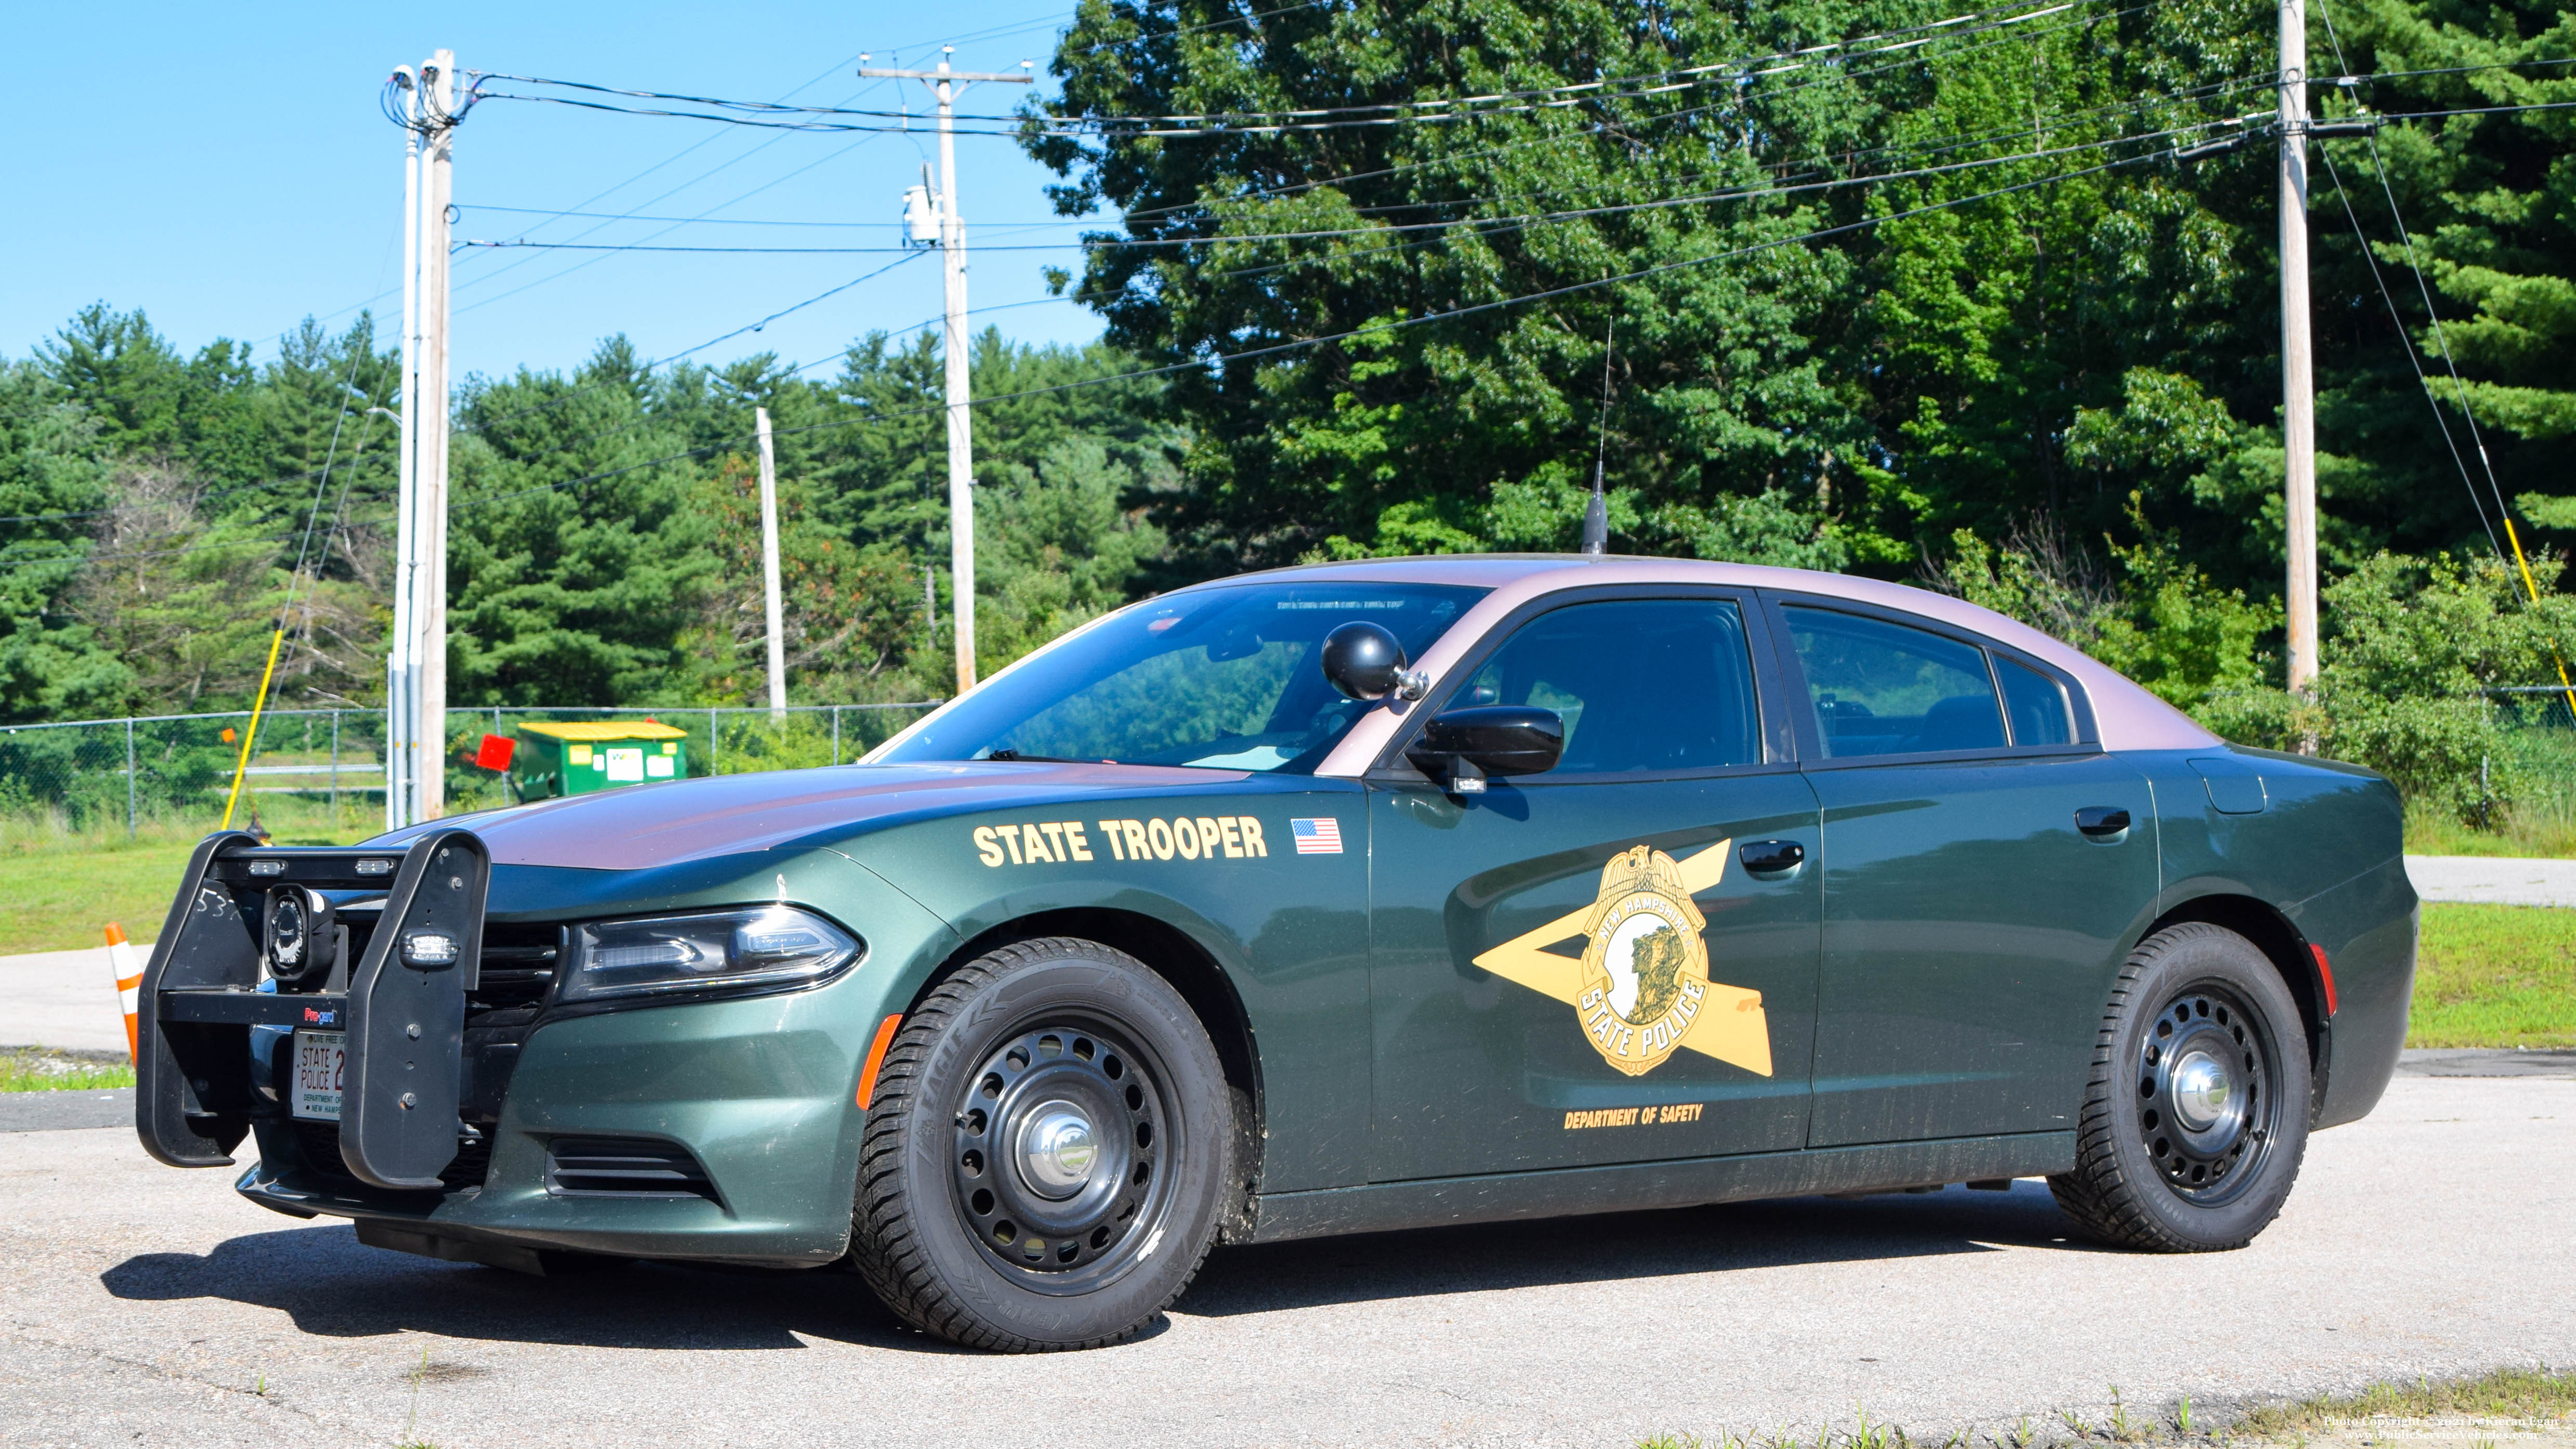 A photo  of New Hampshire State Police
            Cruiser 230, a 2018-2019 Dodge Charger             taken by Kieran Egan